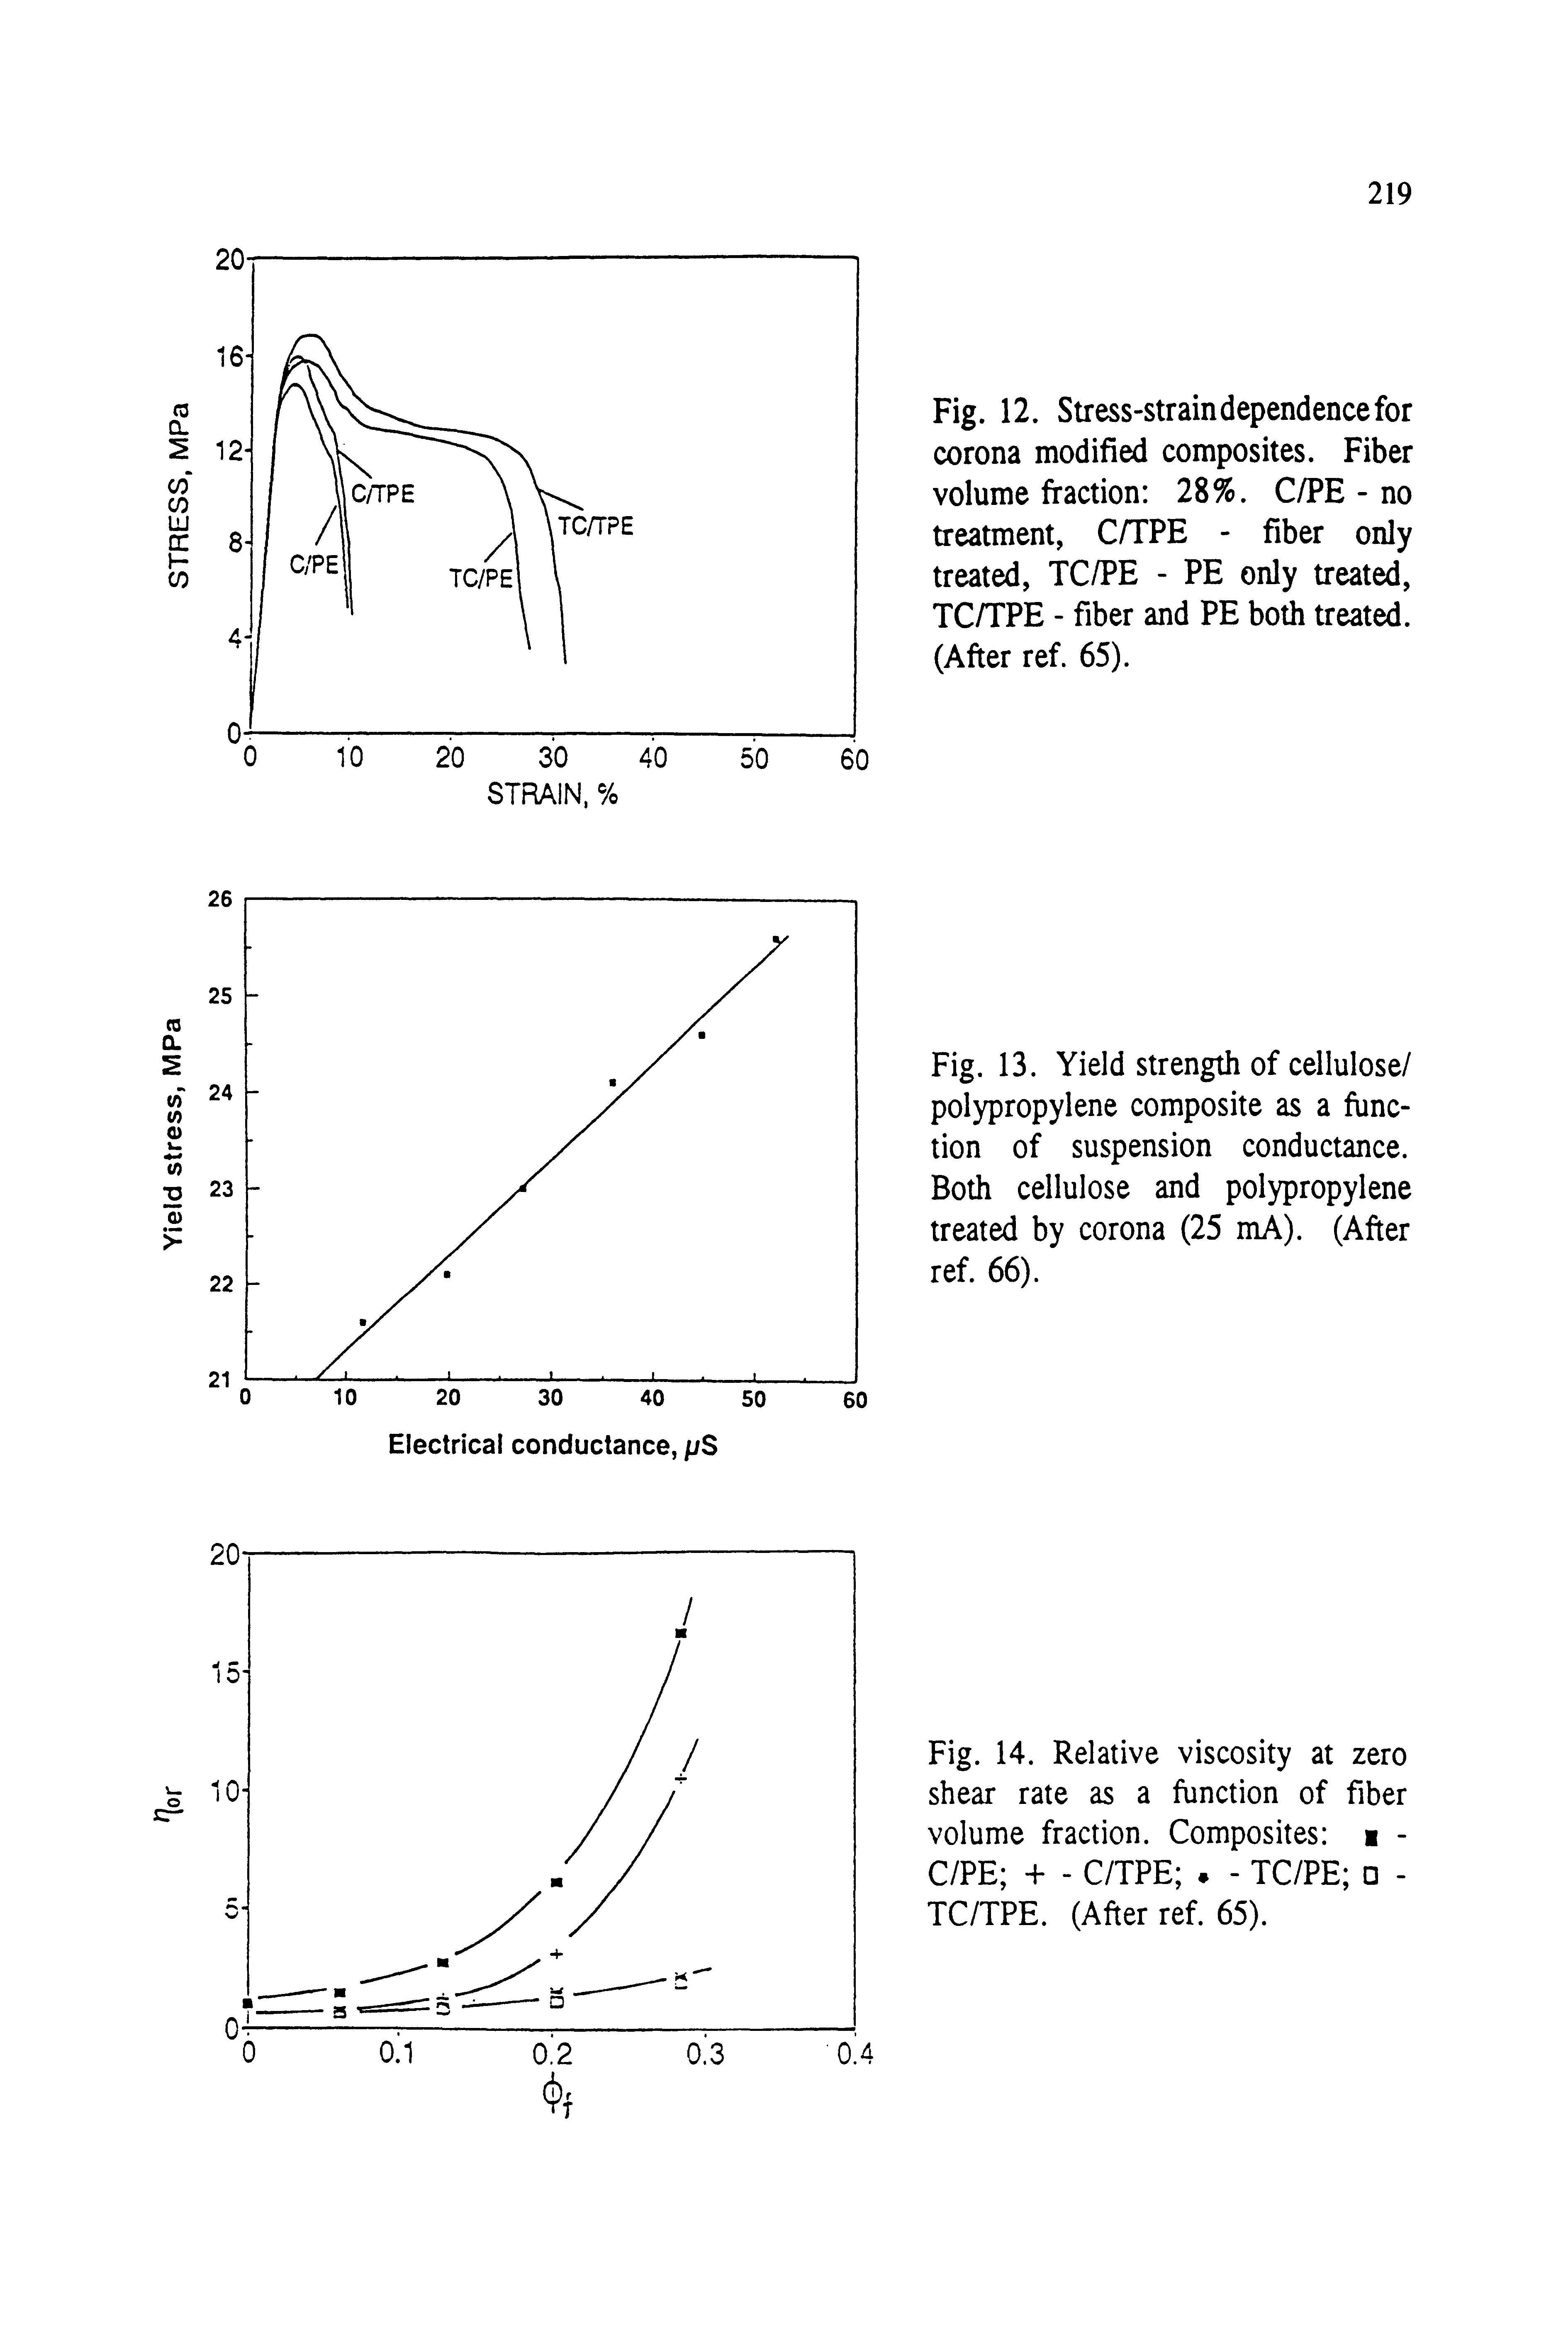 Fig. 14. Relative viscosity at zero shear rate as a function of fiber volume fraction. Composites i -C/PE + - C/TPE - TC/PE -TC/TPE. (After ref 65).